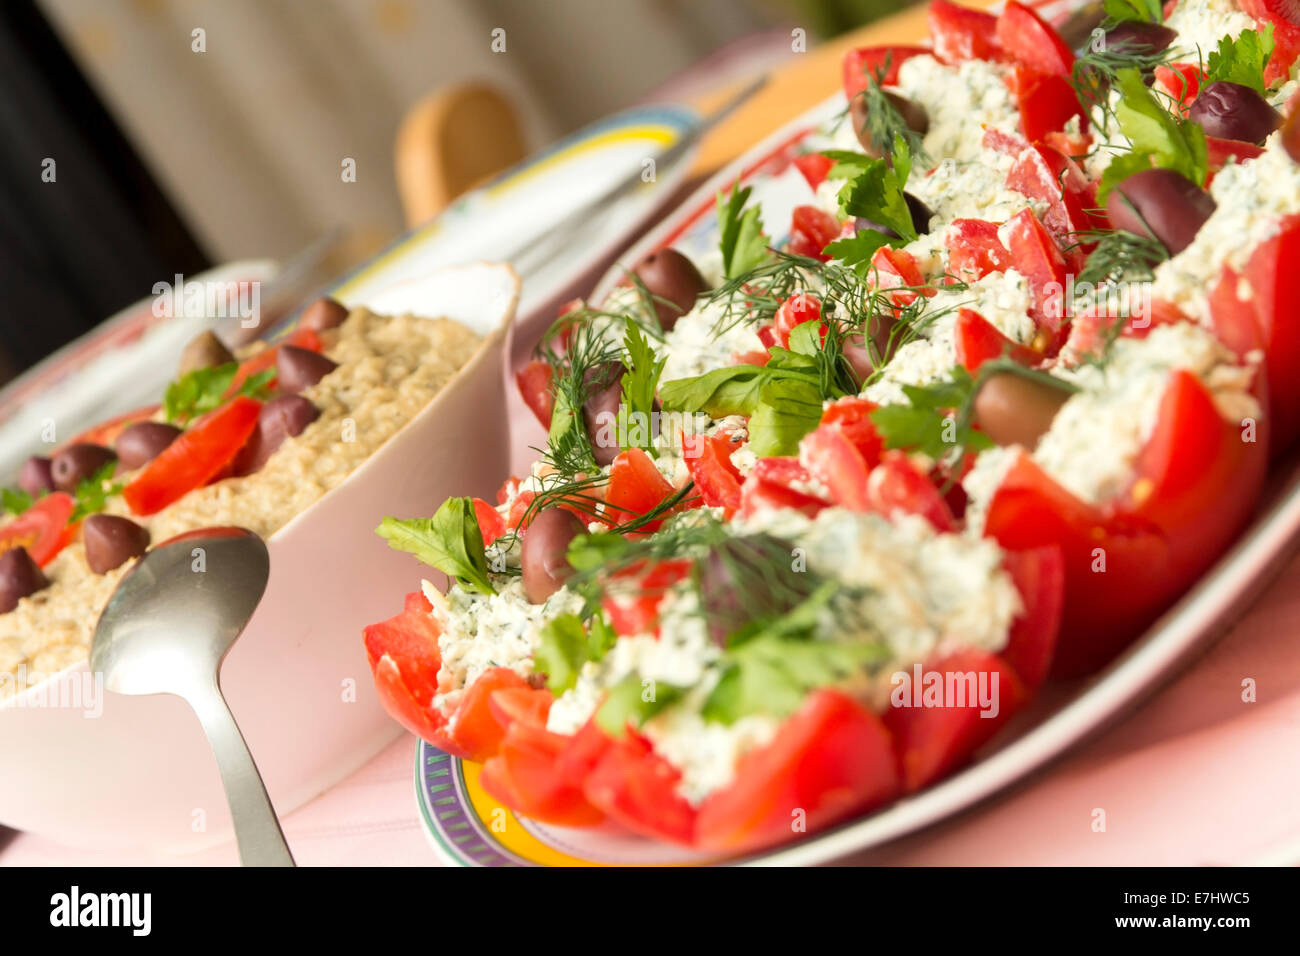 Close-up of stuffed tomatoes with cheese and eggplant salad on table Stock Photo